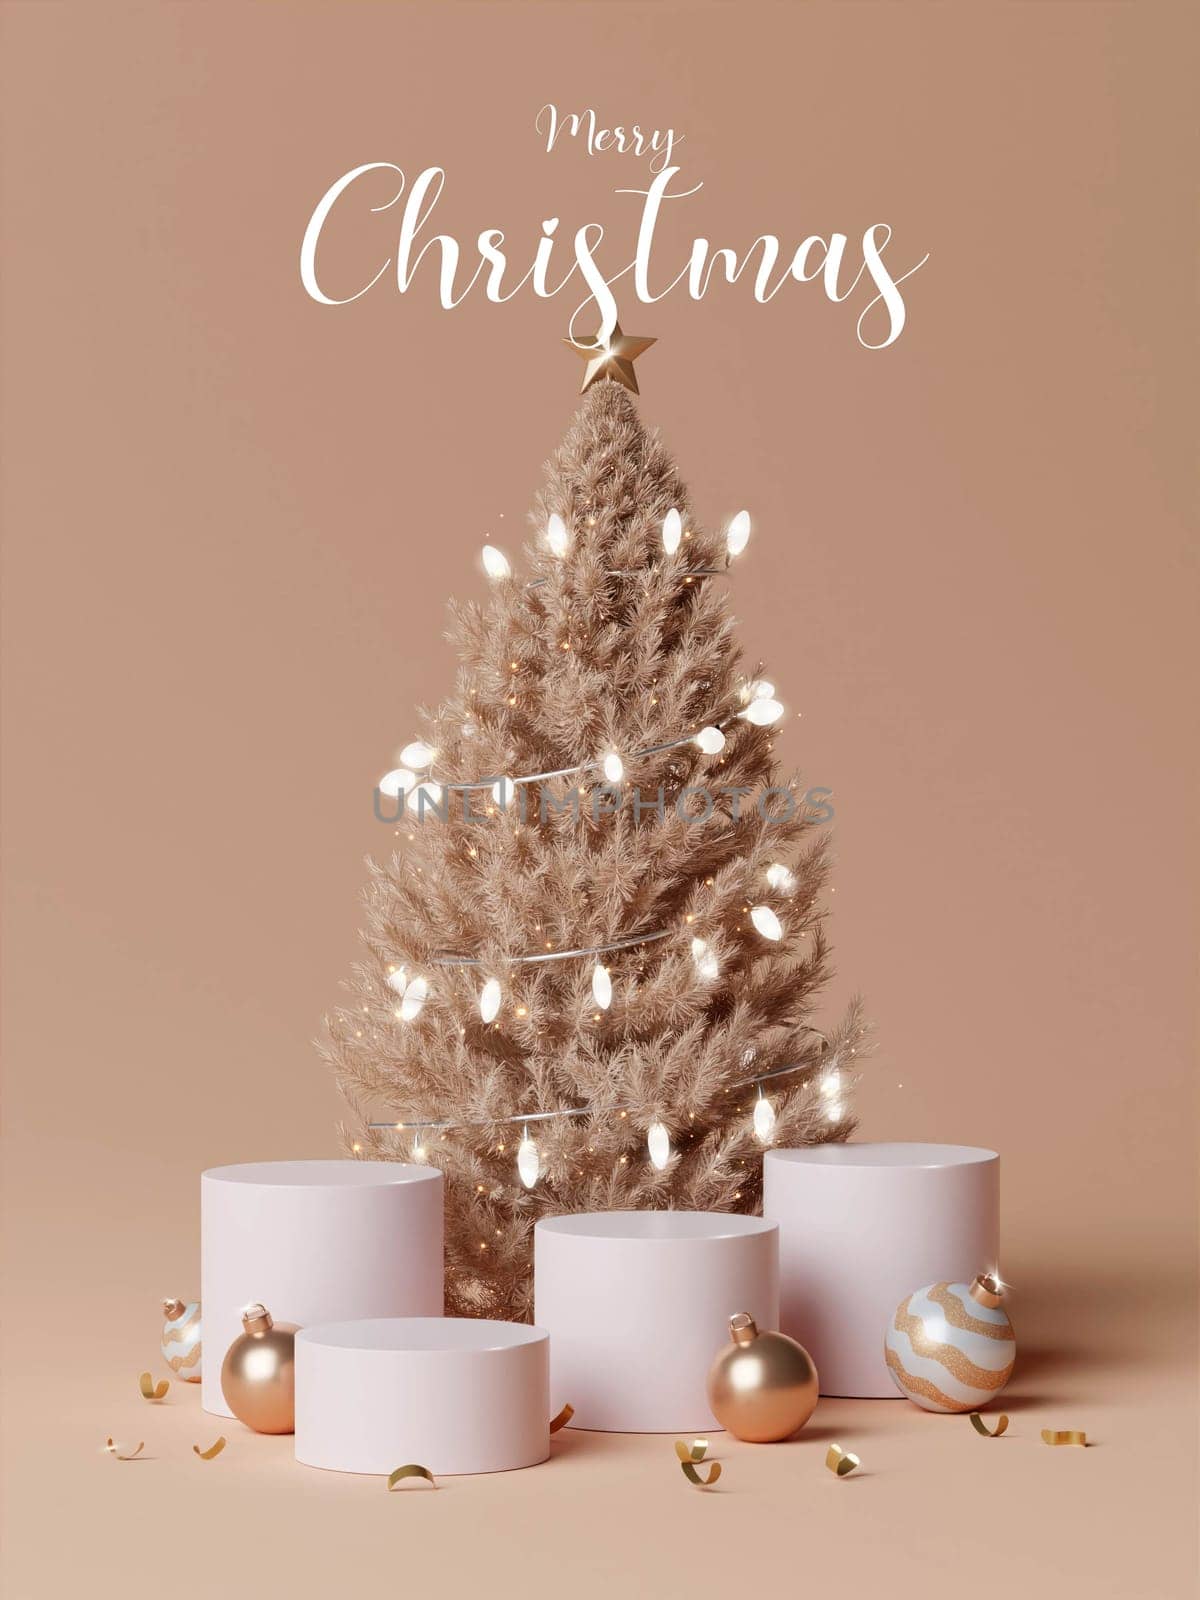 3d Christmas tree podium. Realistic 3d design stage podium. Decorative festive elements glass bauble balls. Xmas holiday template podium. by meepiangraphic